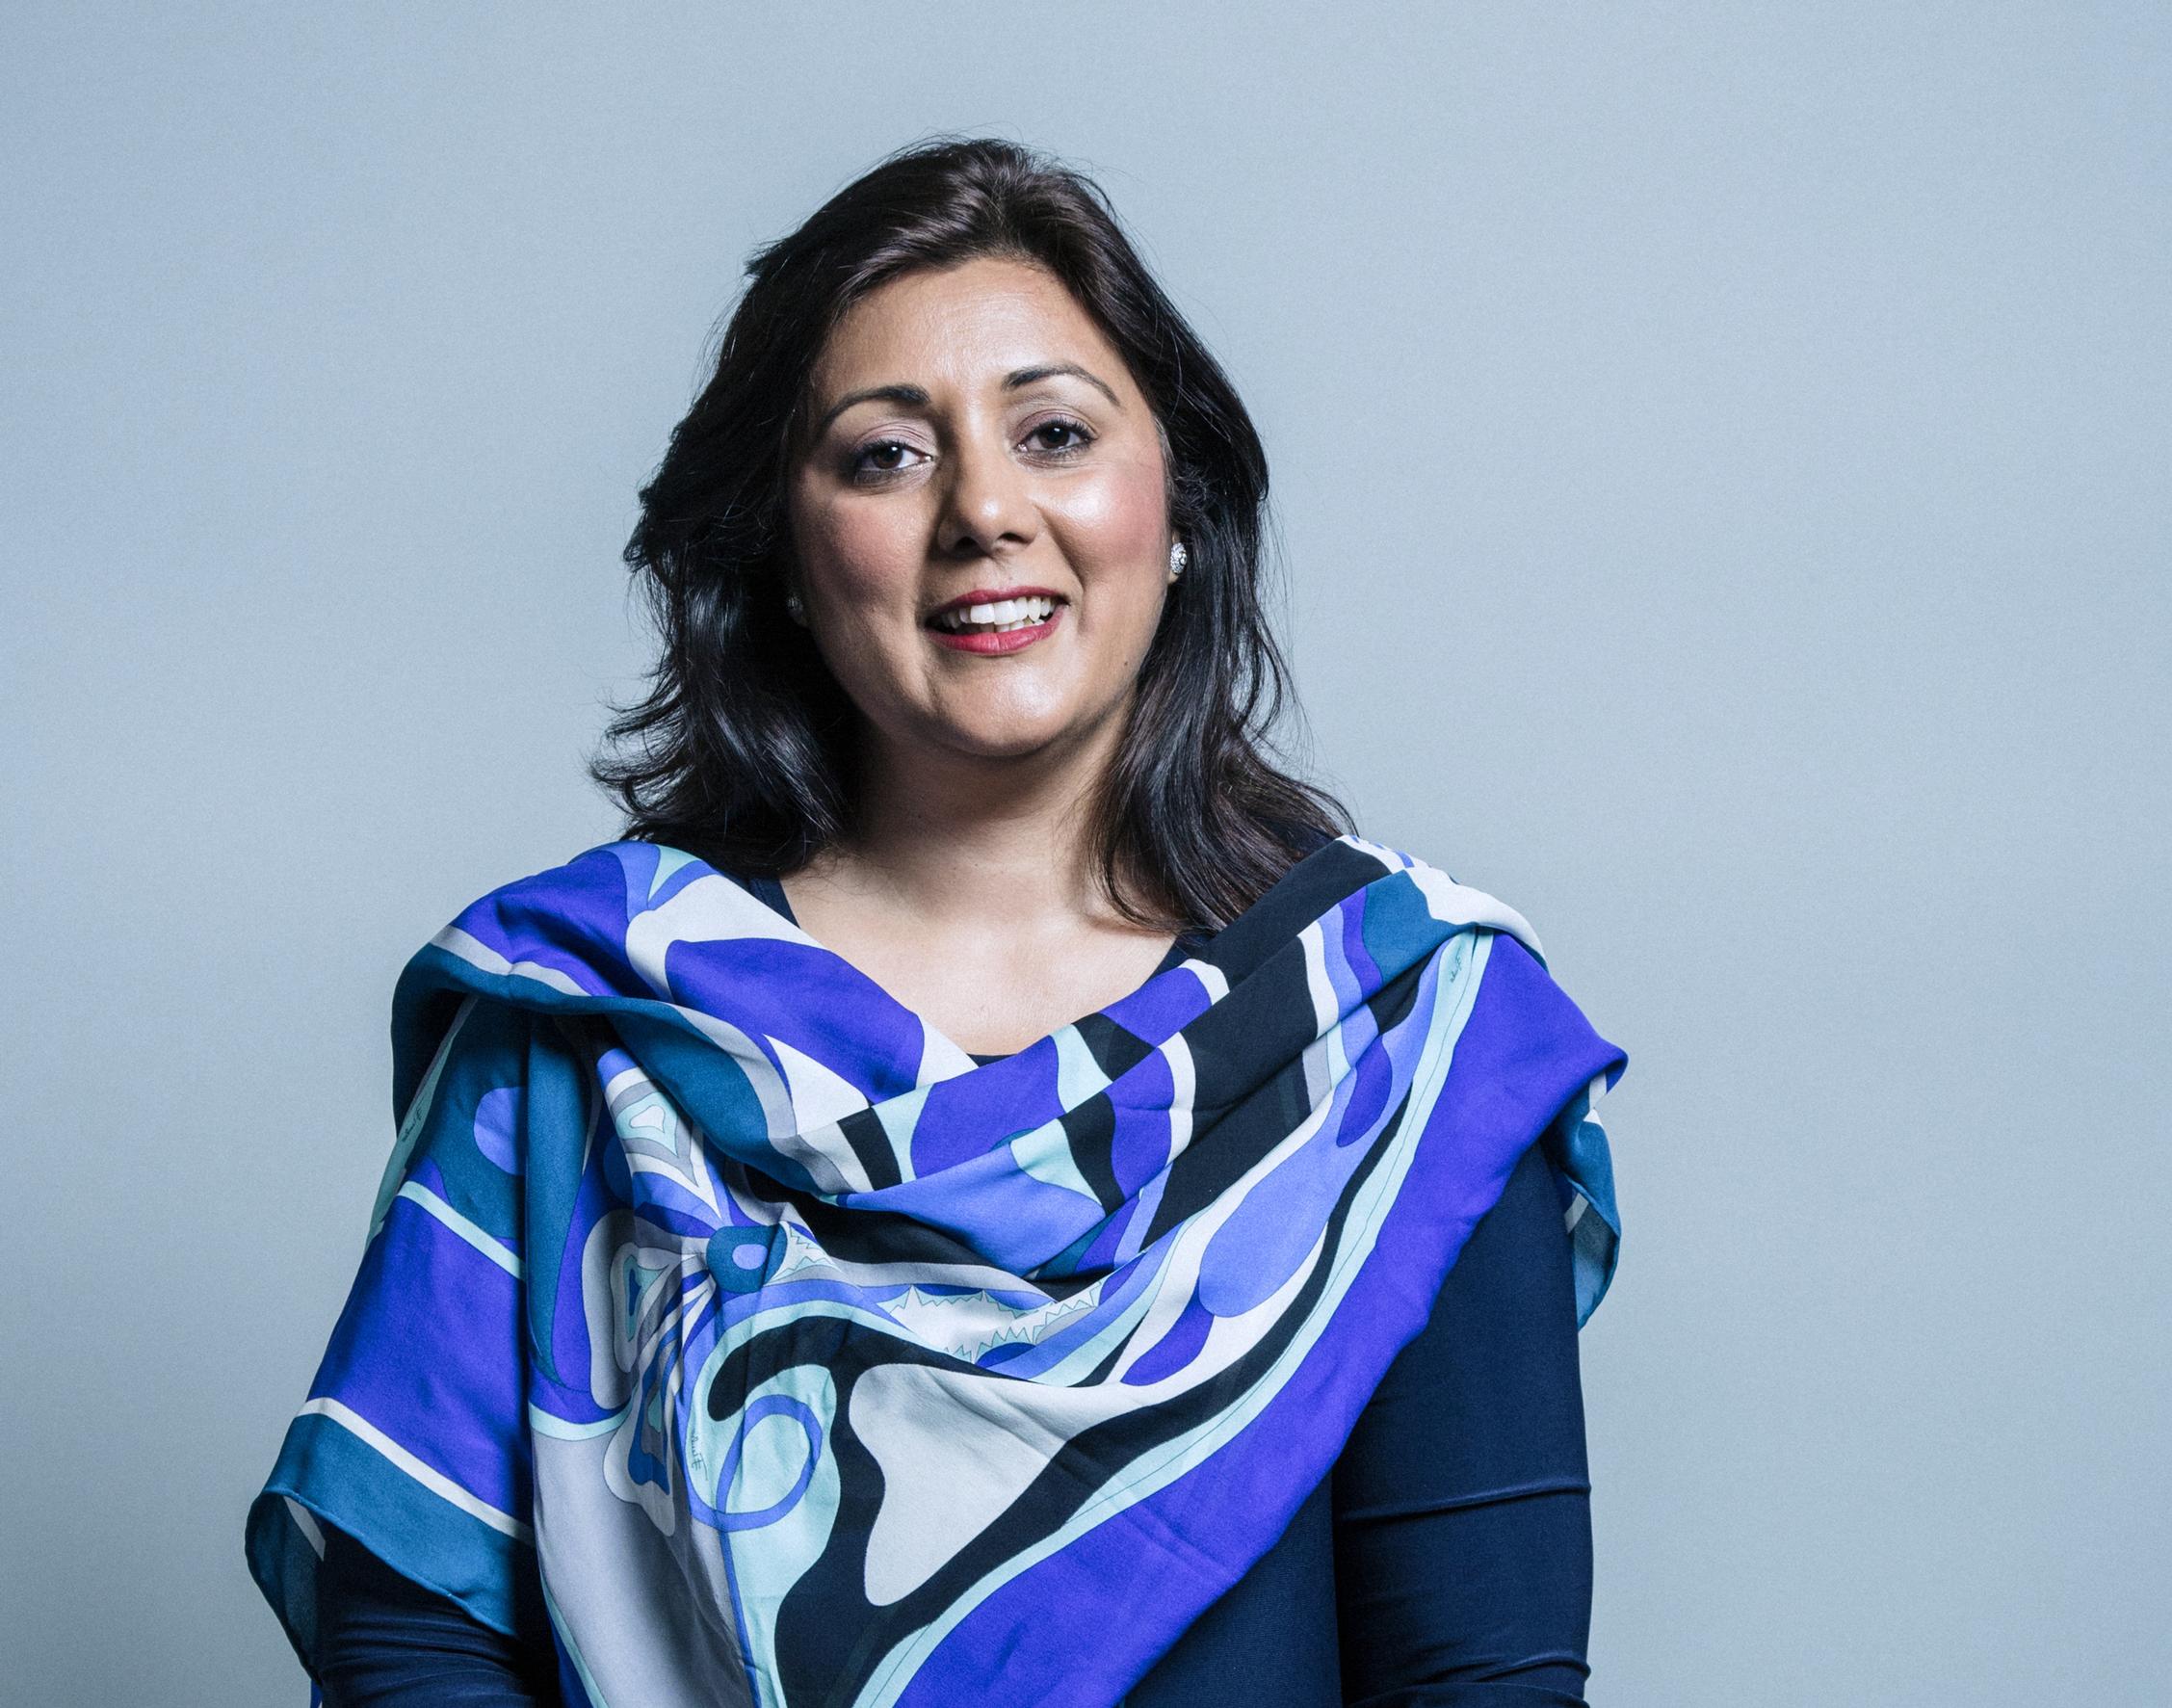 Nusrat Ghani, who made history as the first female Muslim minister to speak from the House of Commons despatch box, has lost her post in the cabinet reshuffle